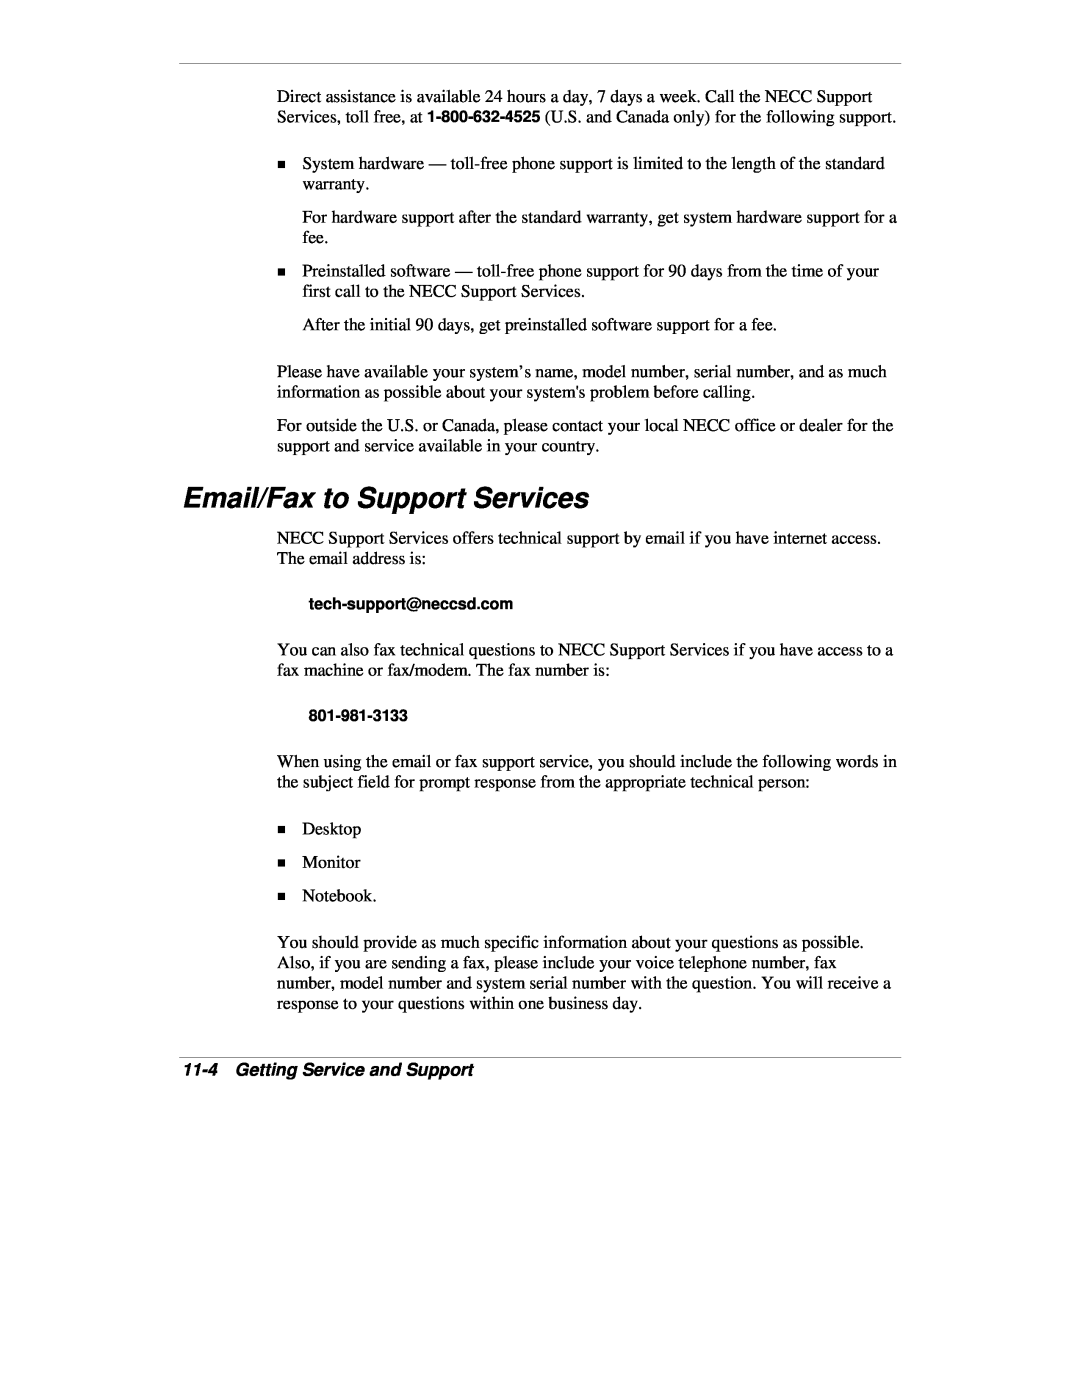 NEC VXi manual Email/Fax to Support Services, 11-4Getting Service and Support 